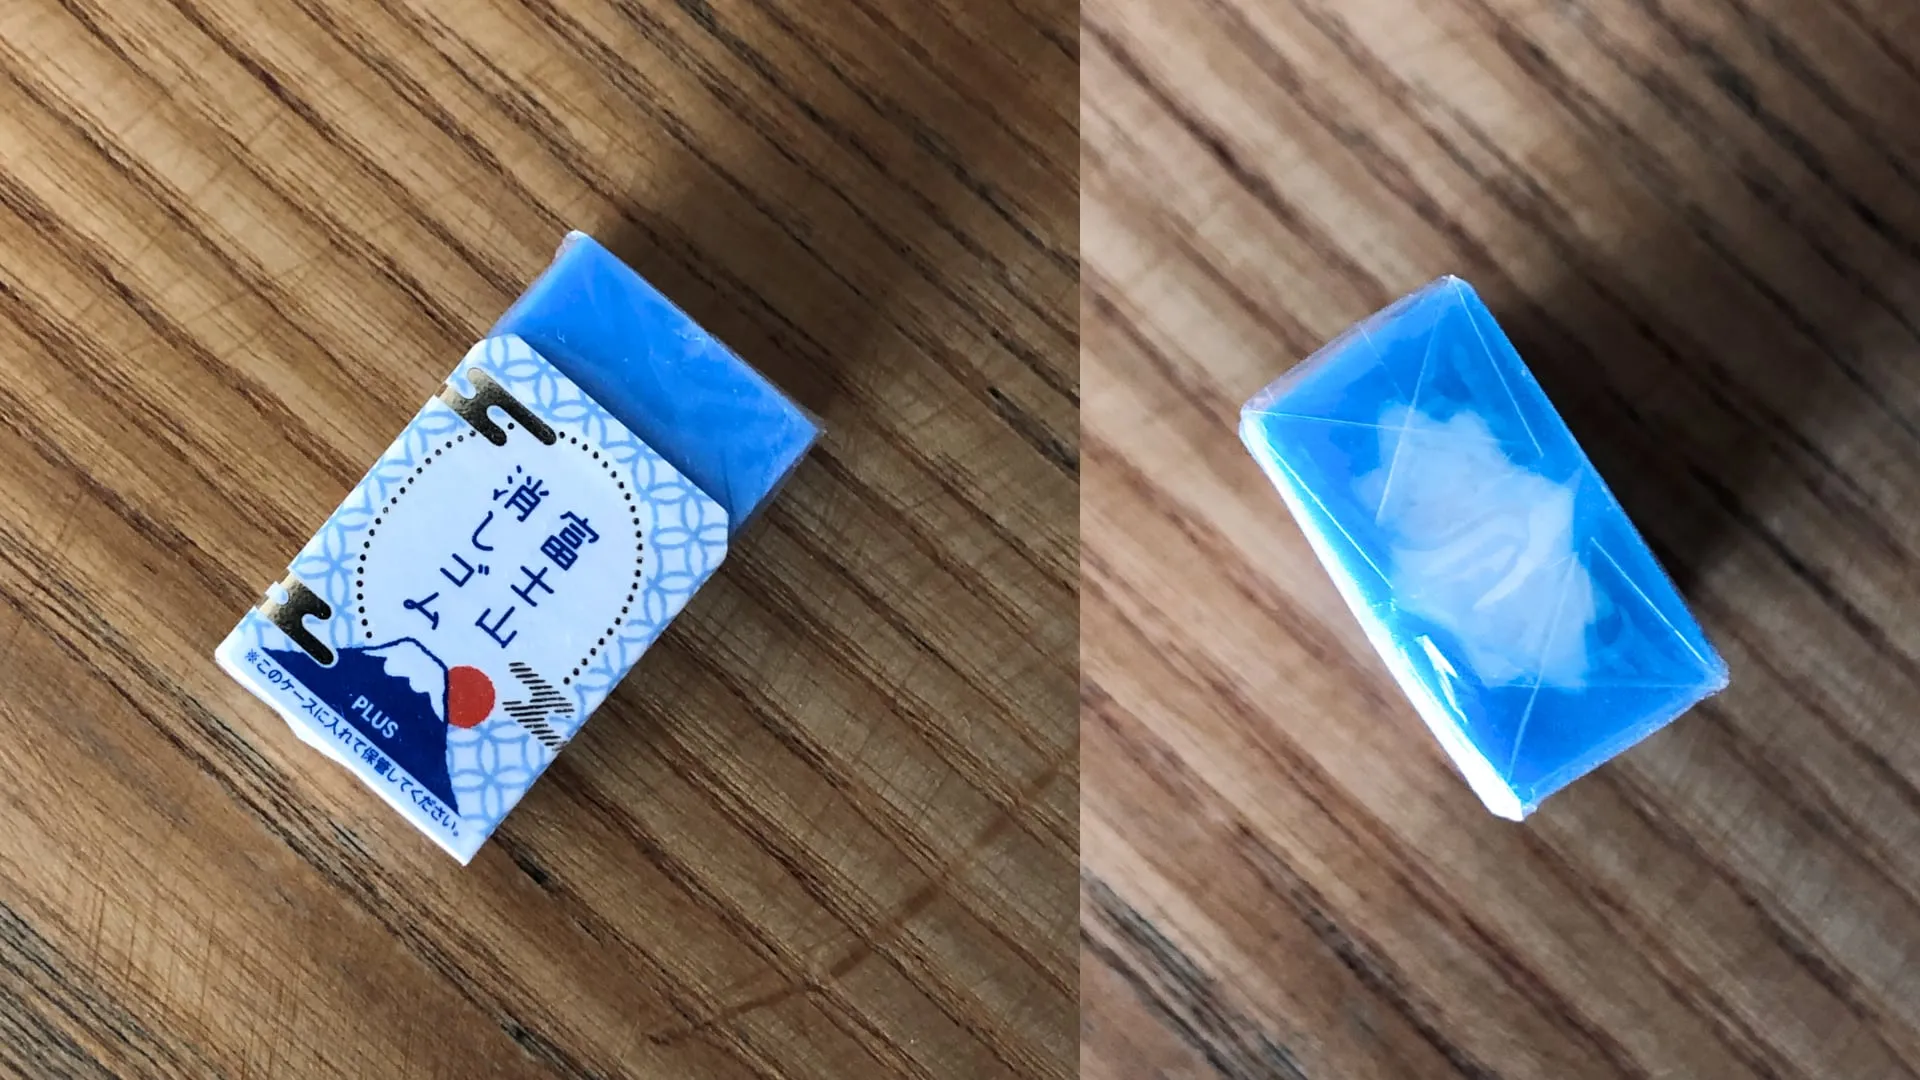 A blue and white eraser that will get the shape of Mount Fuji the more you erase things